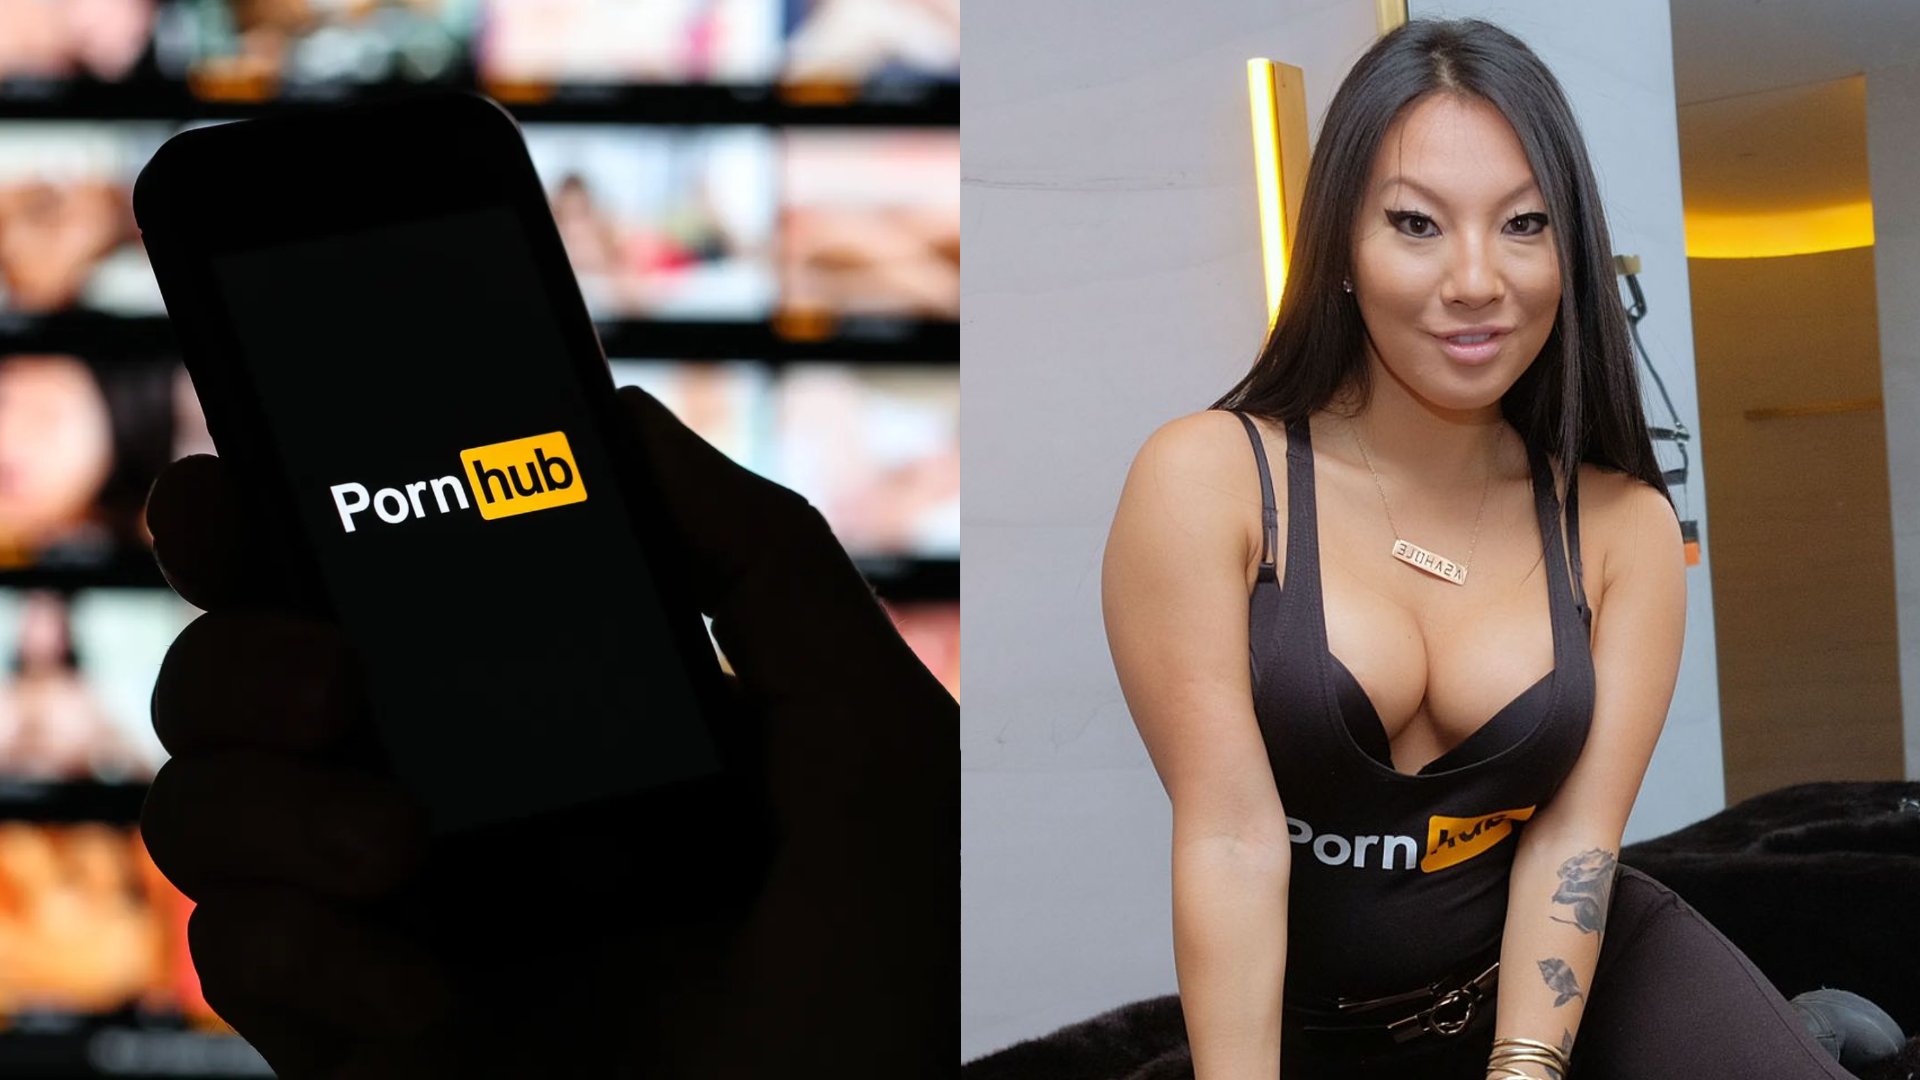 Punrhub - Pornhub Sold To Private Equity Firm For Undisclosed Amount